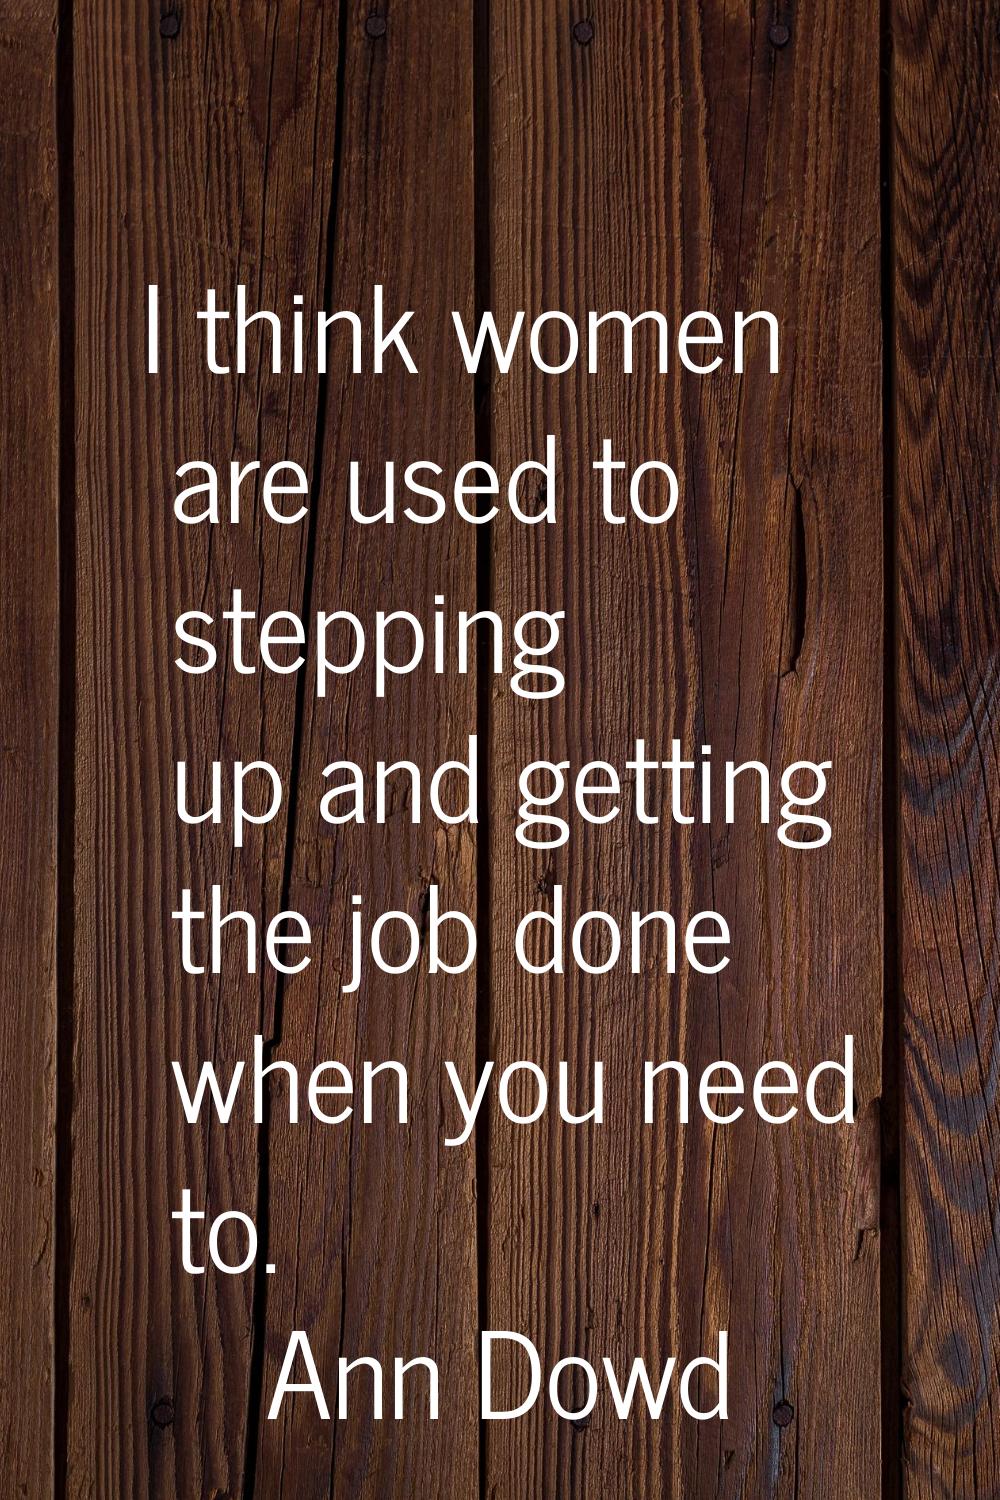 I think women are used to stepping up and getting the job done when you need to.